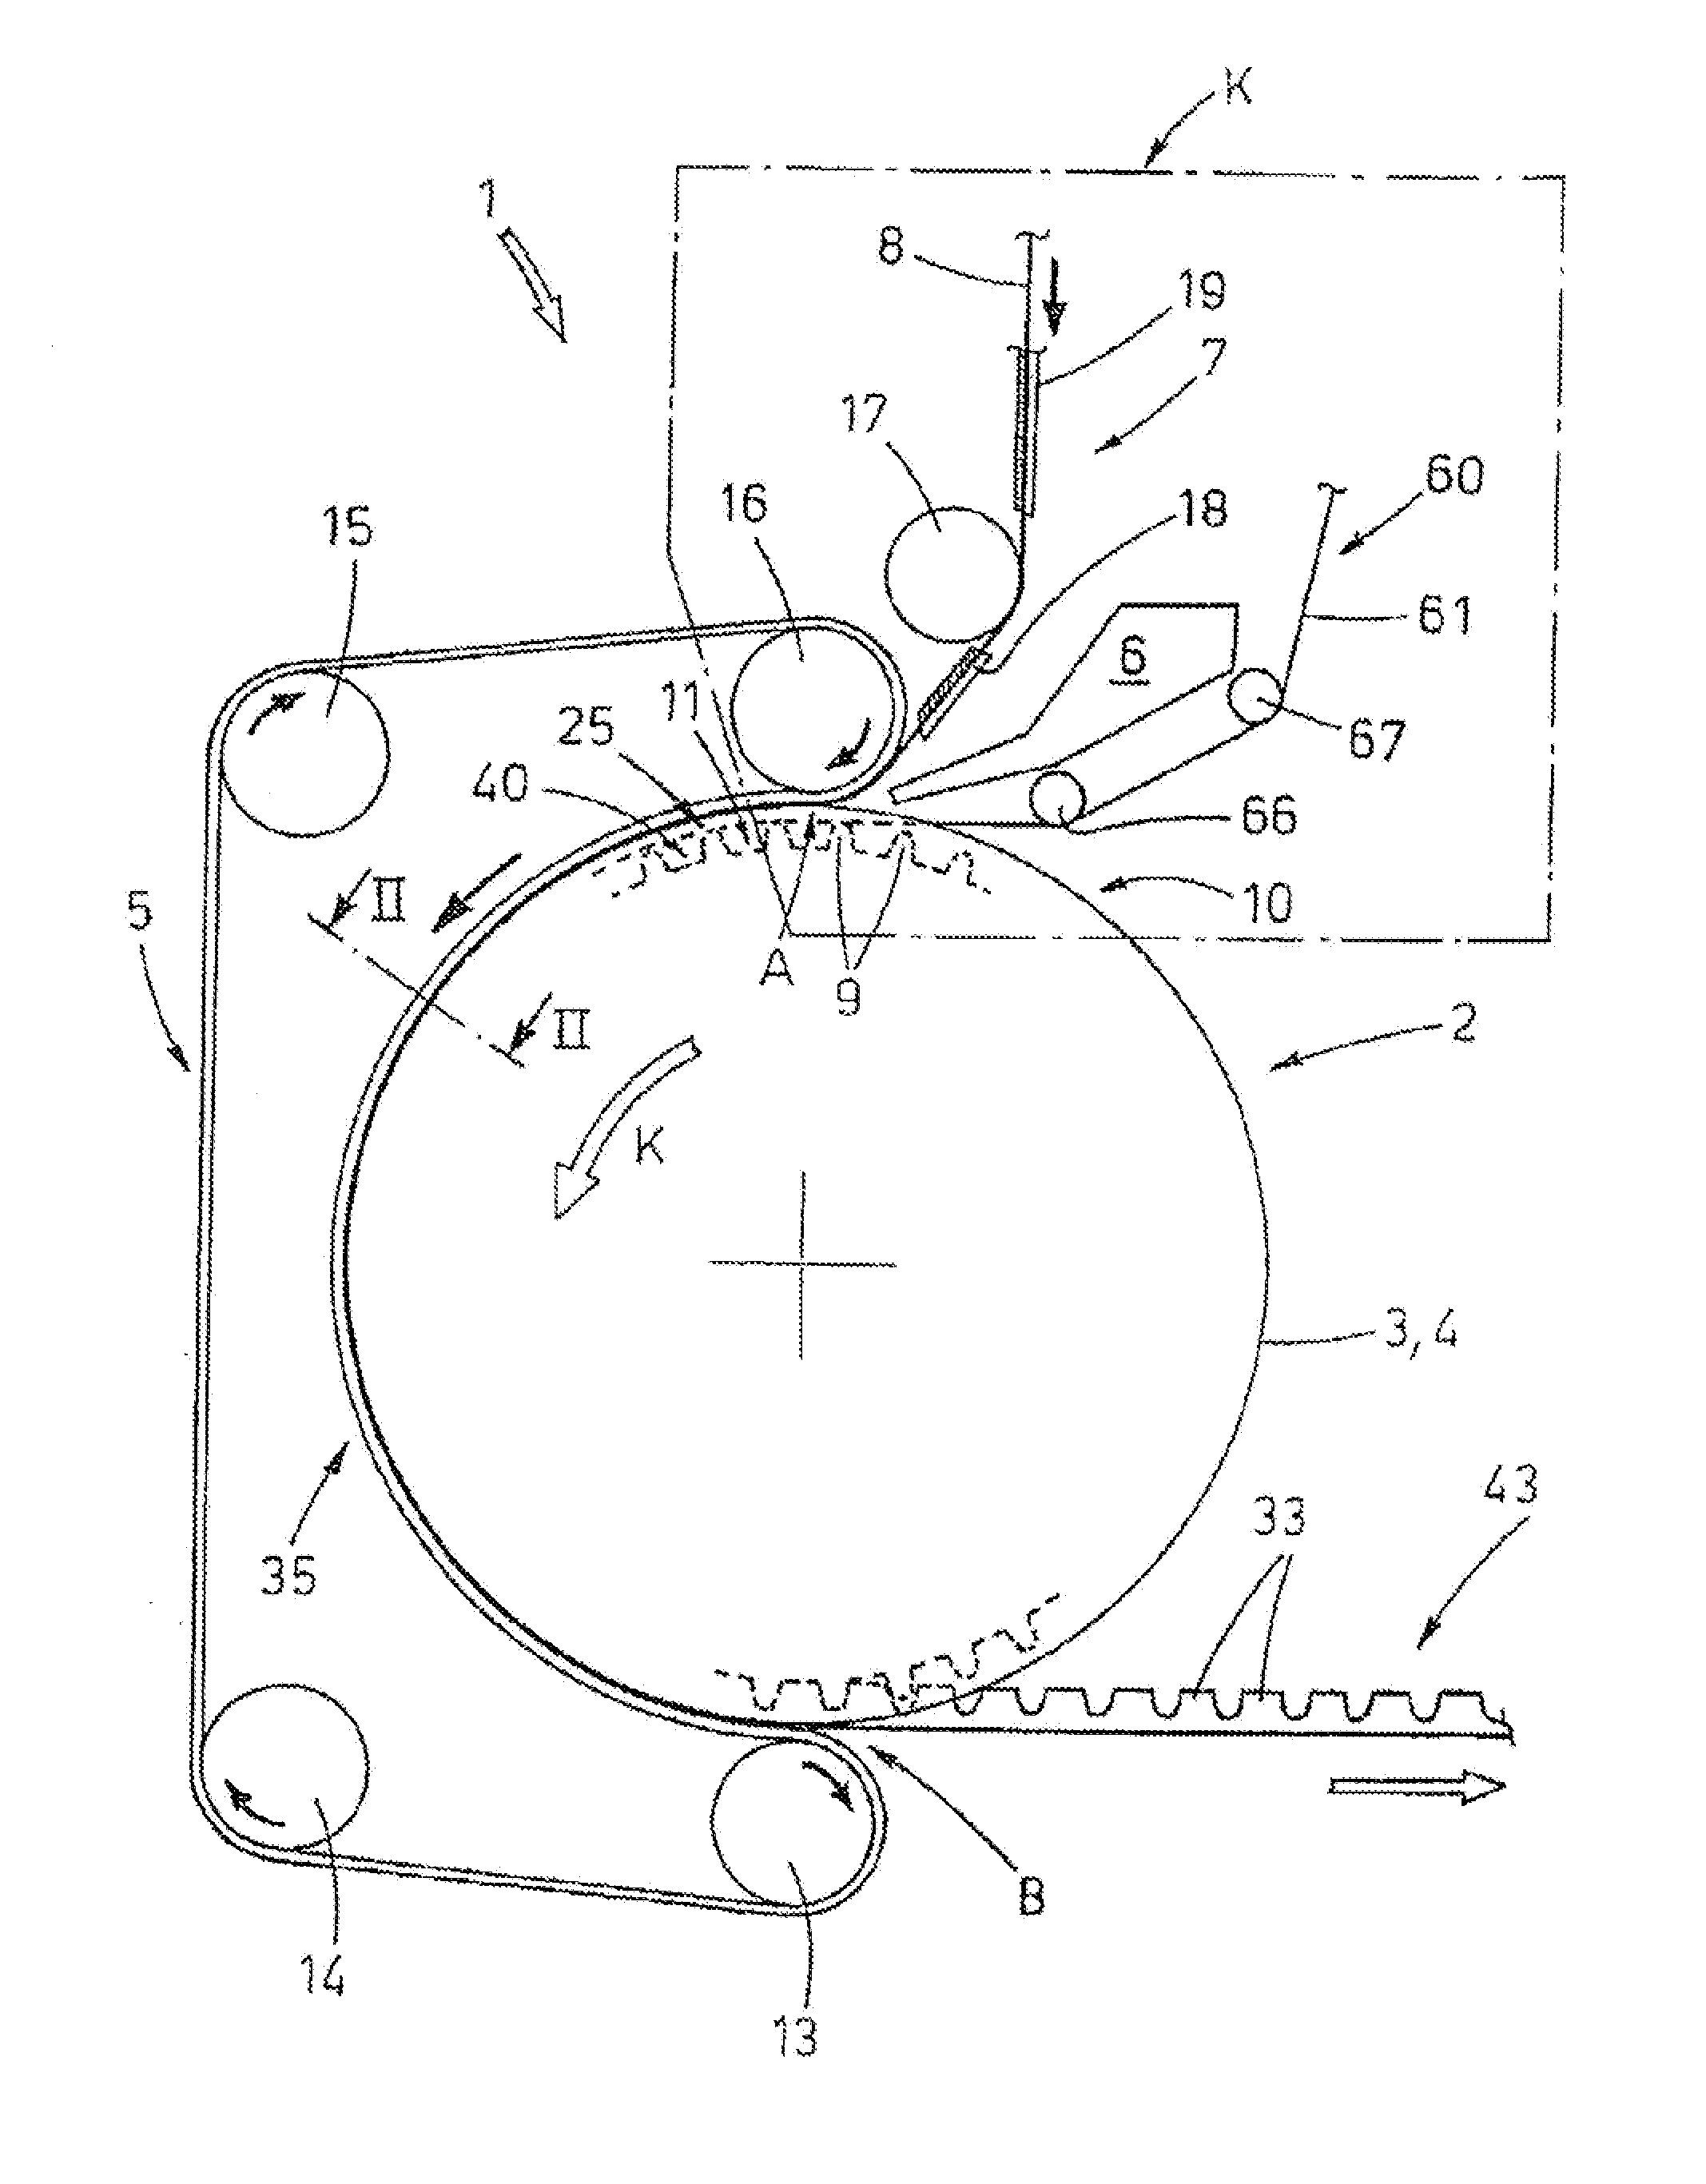 Cogged belt for conveying articles and/or for power transmission, and a method and an apparatus for realising the cogged belt